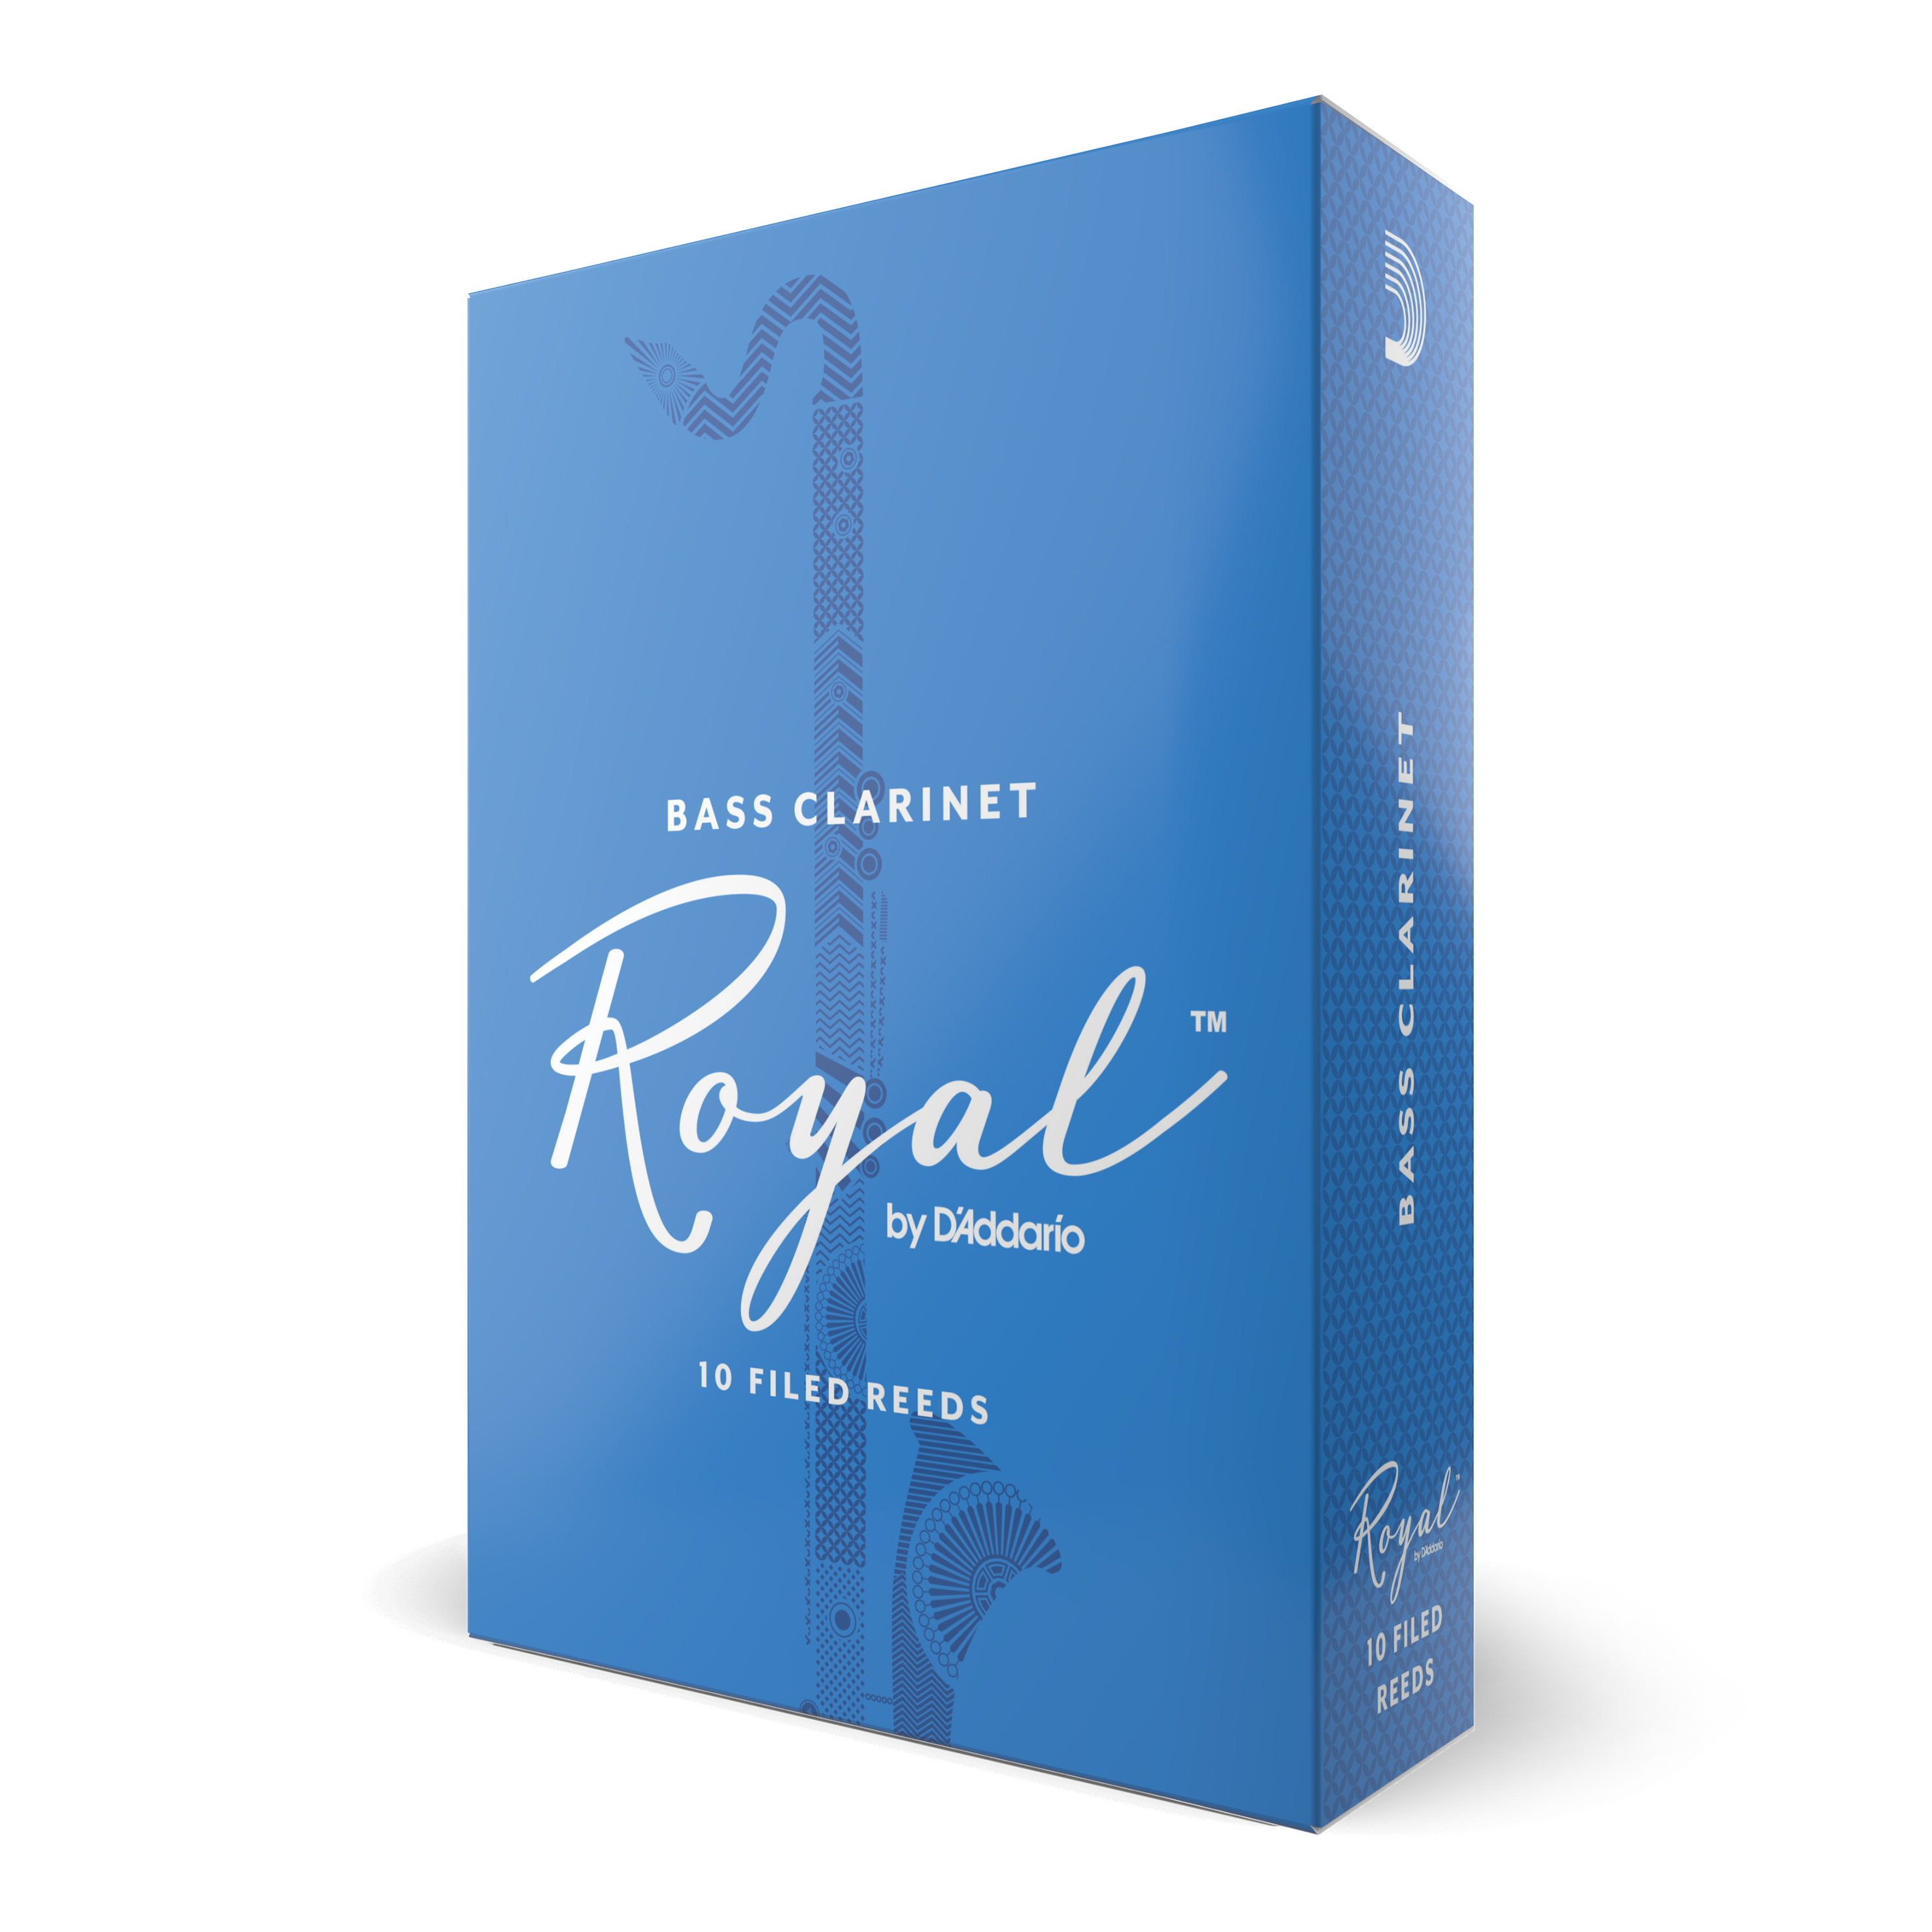 Blue box of 10 Royal by D'addario Bass Clarinet Reeds strength two and a half